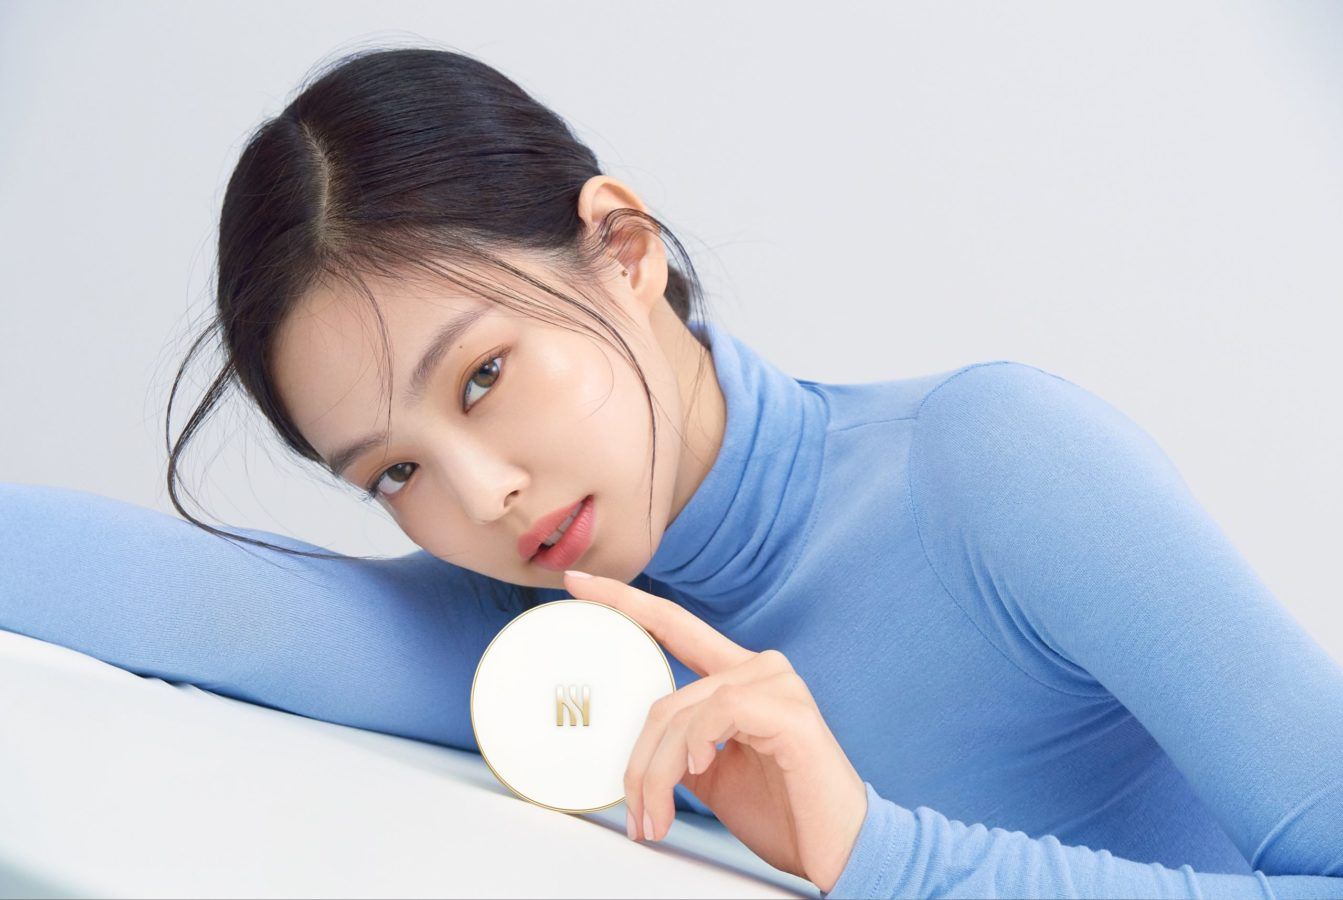 10 Korean beauty products Korean celebrities actually use (and where to shop)